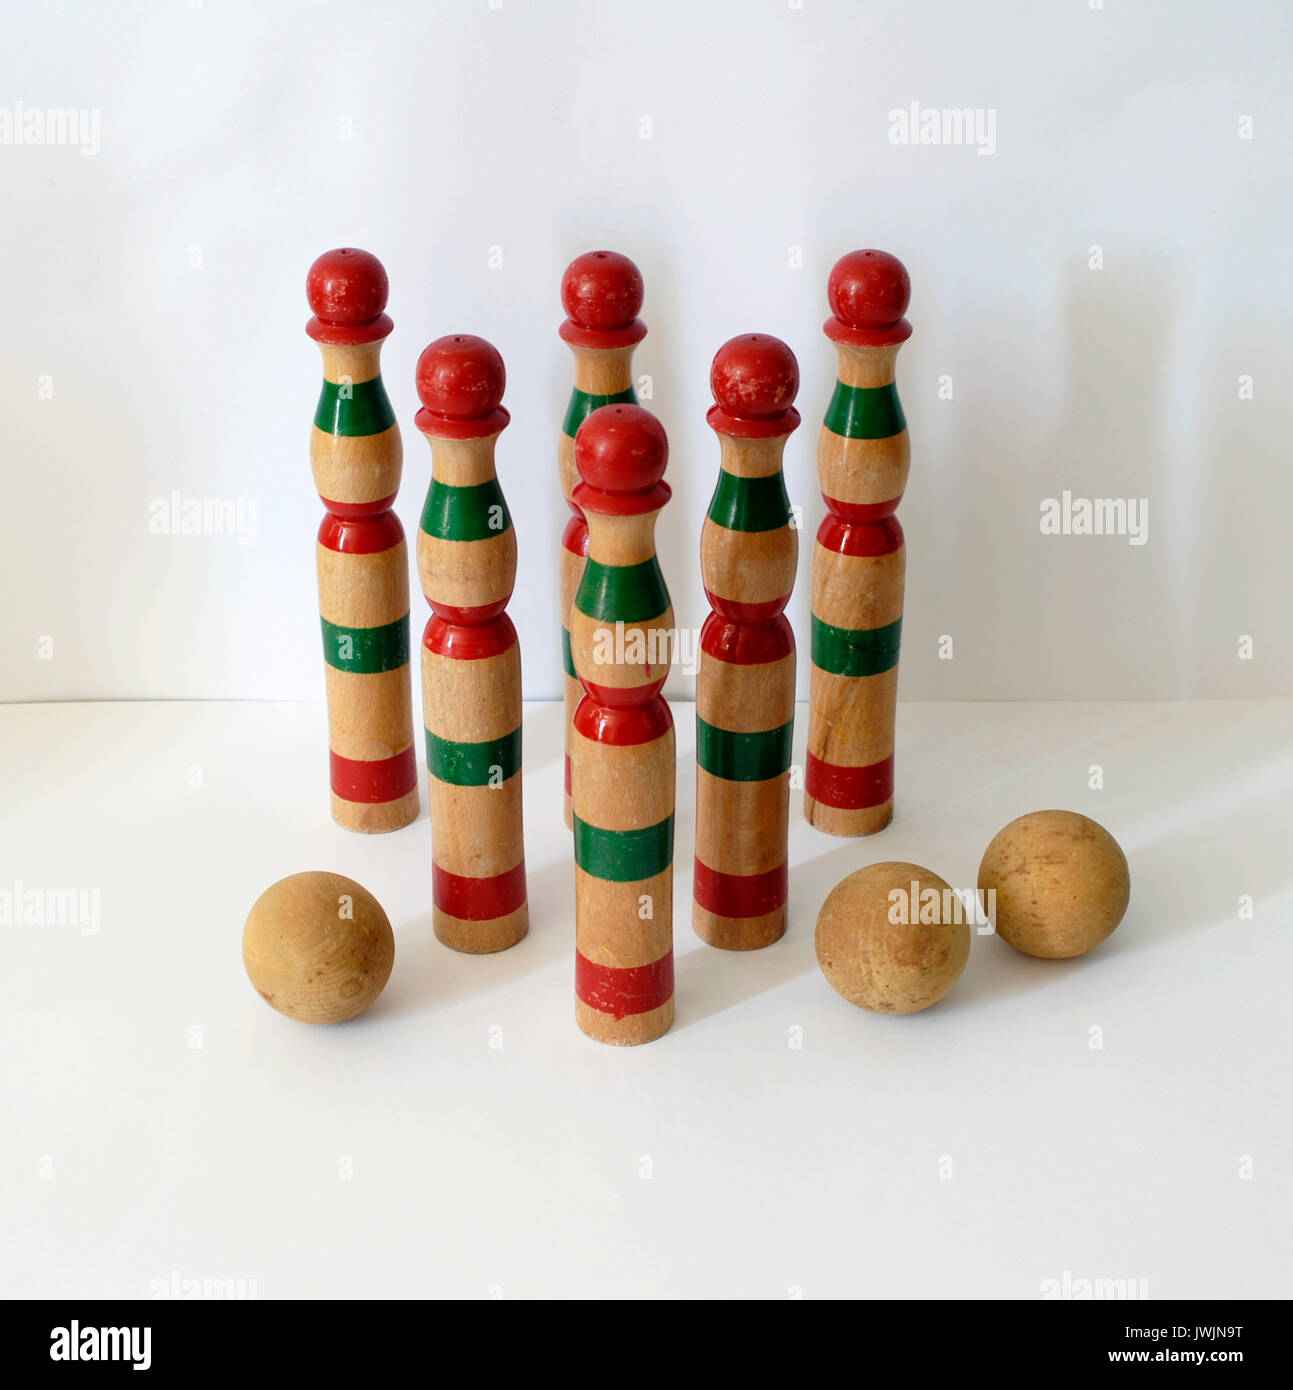 Vintage wooden bowling kit game, with balls. Made in Spain, with colors green and red Stock Photo